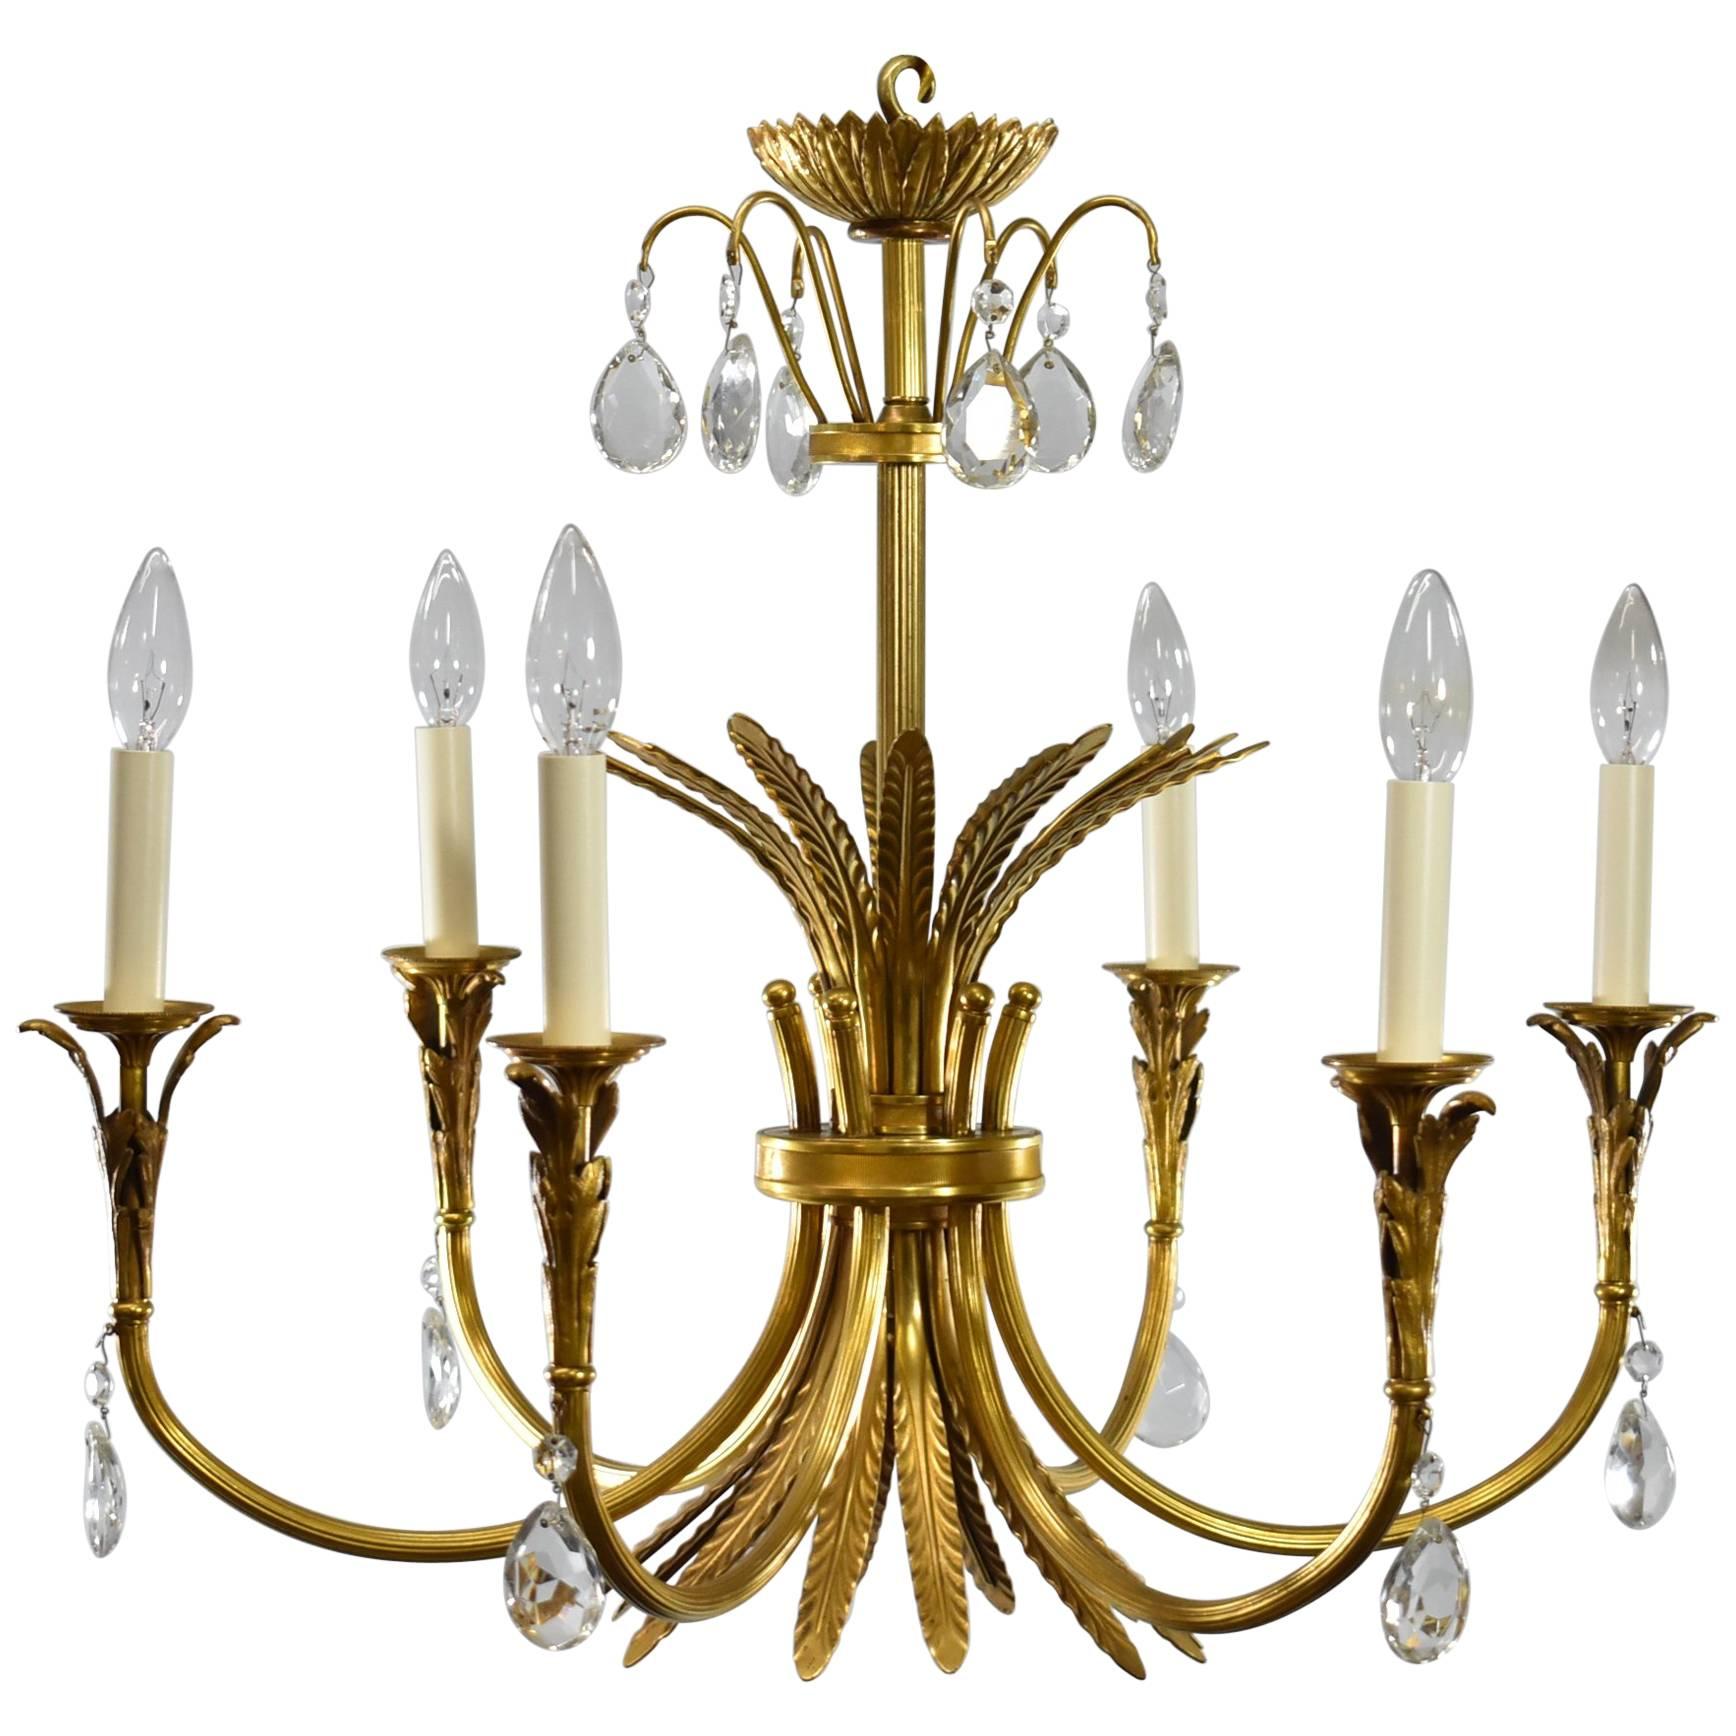 Italian Neoclassic Style Six-Arm Brass and Crystal Chandelier